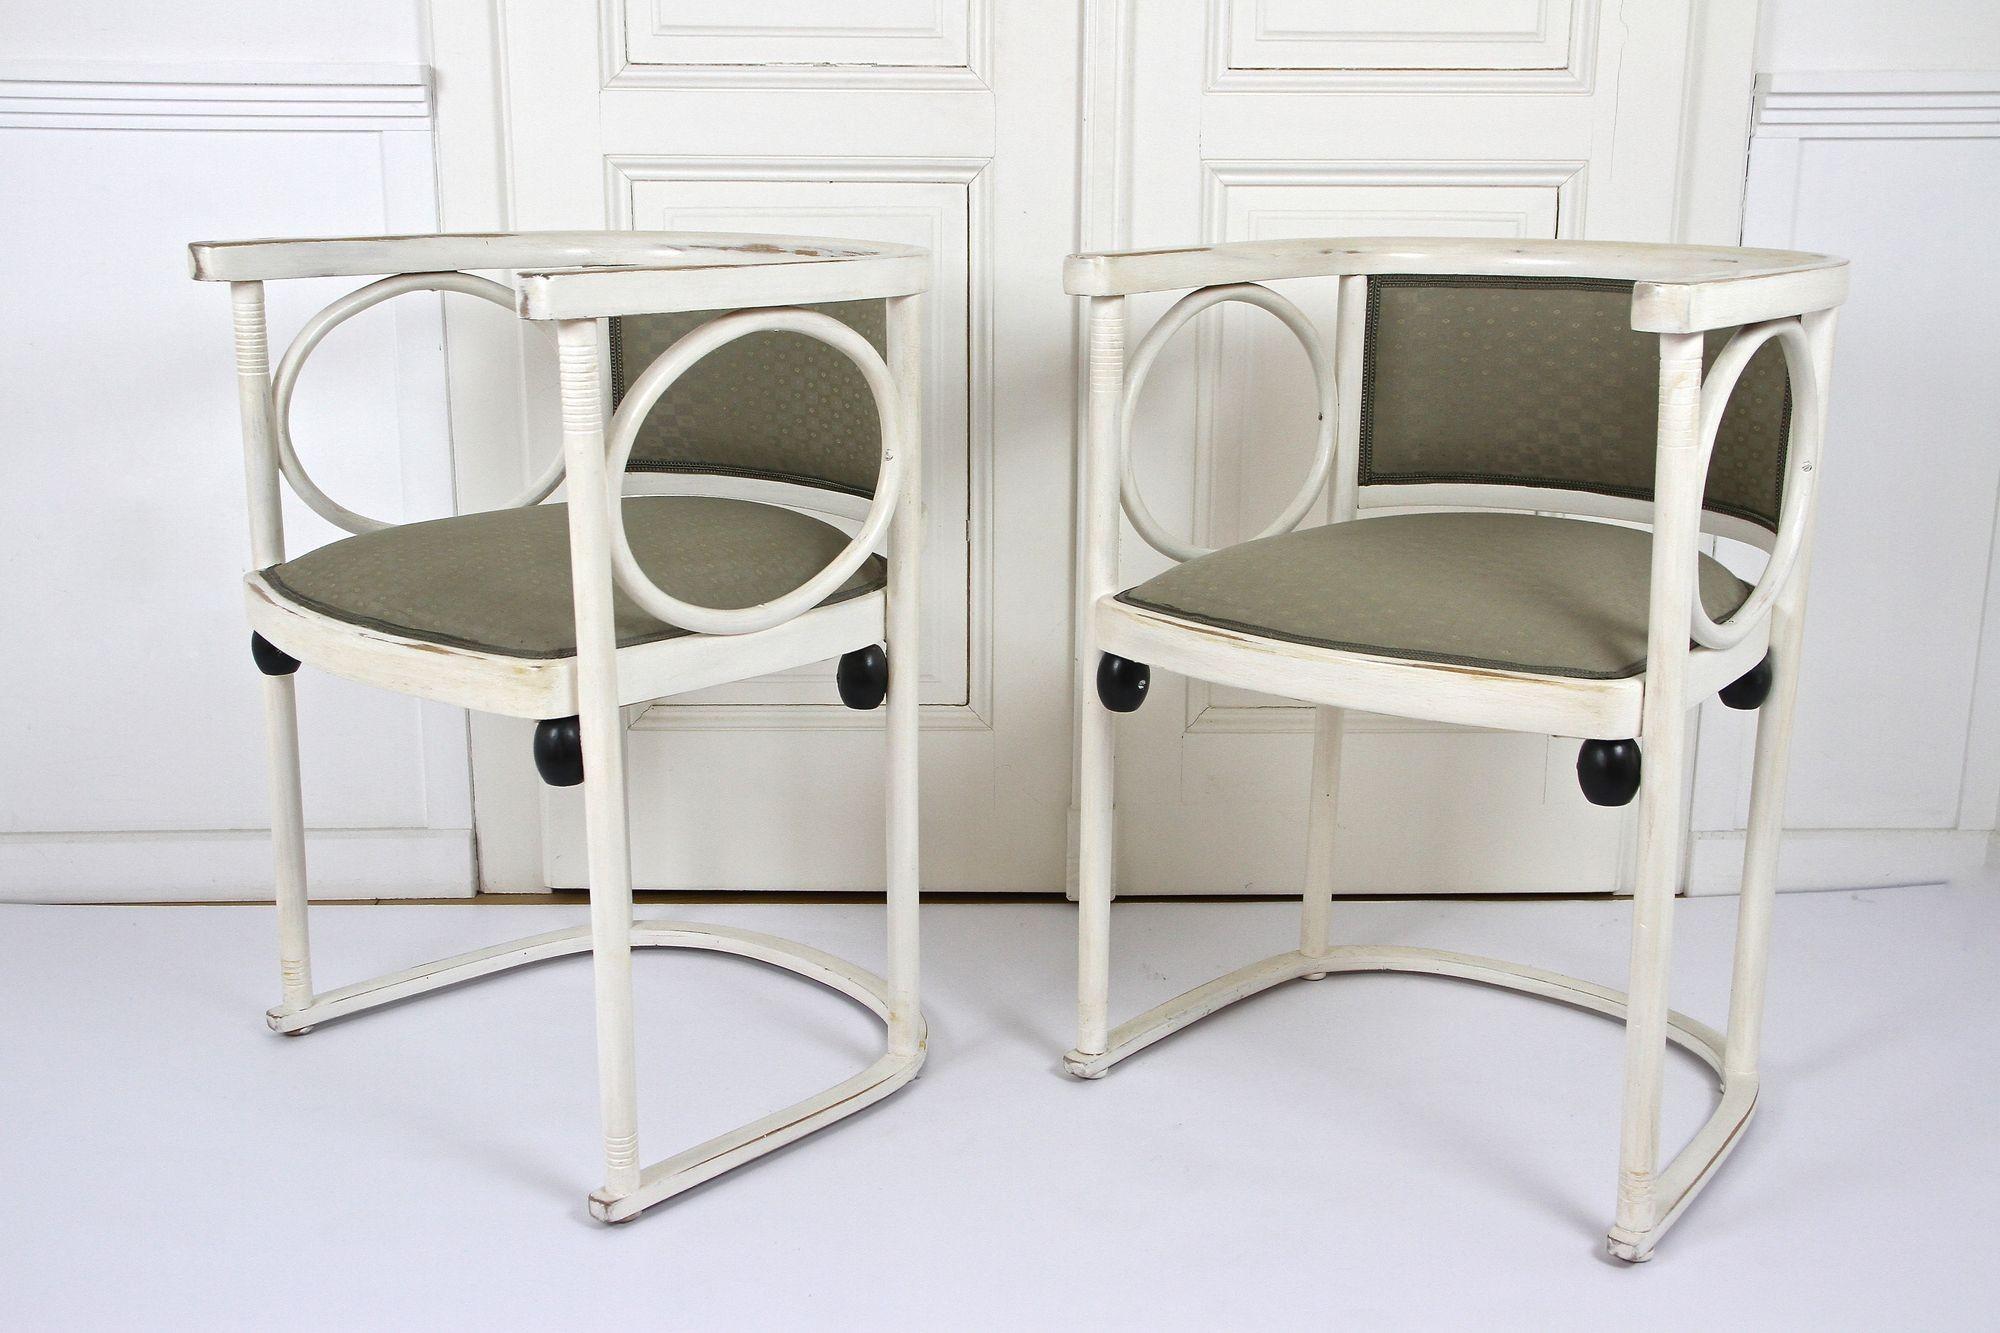 20th Century Art Nouveau Thonet Armchairs by Josef Hoffmann, White Lacquered, AT ca. 1905 For Sale